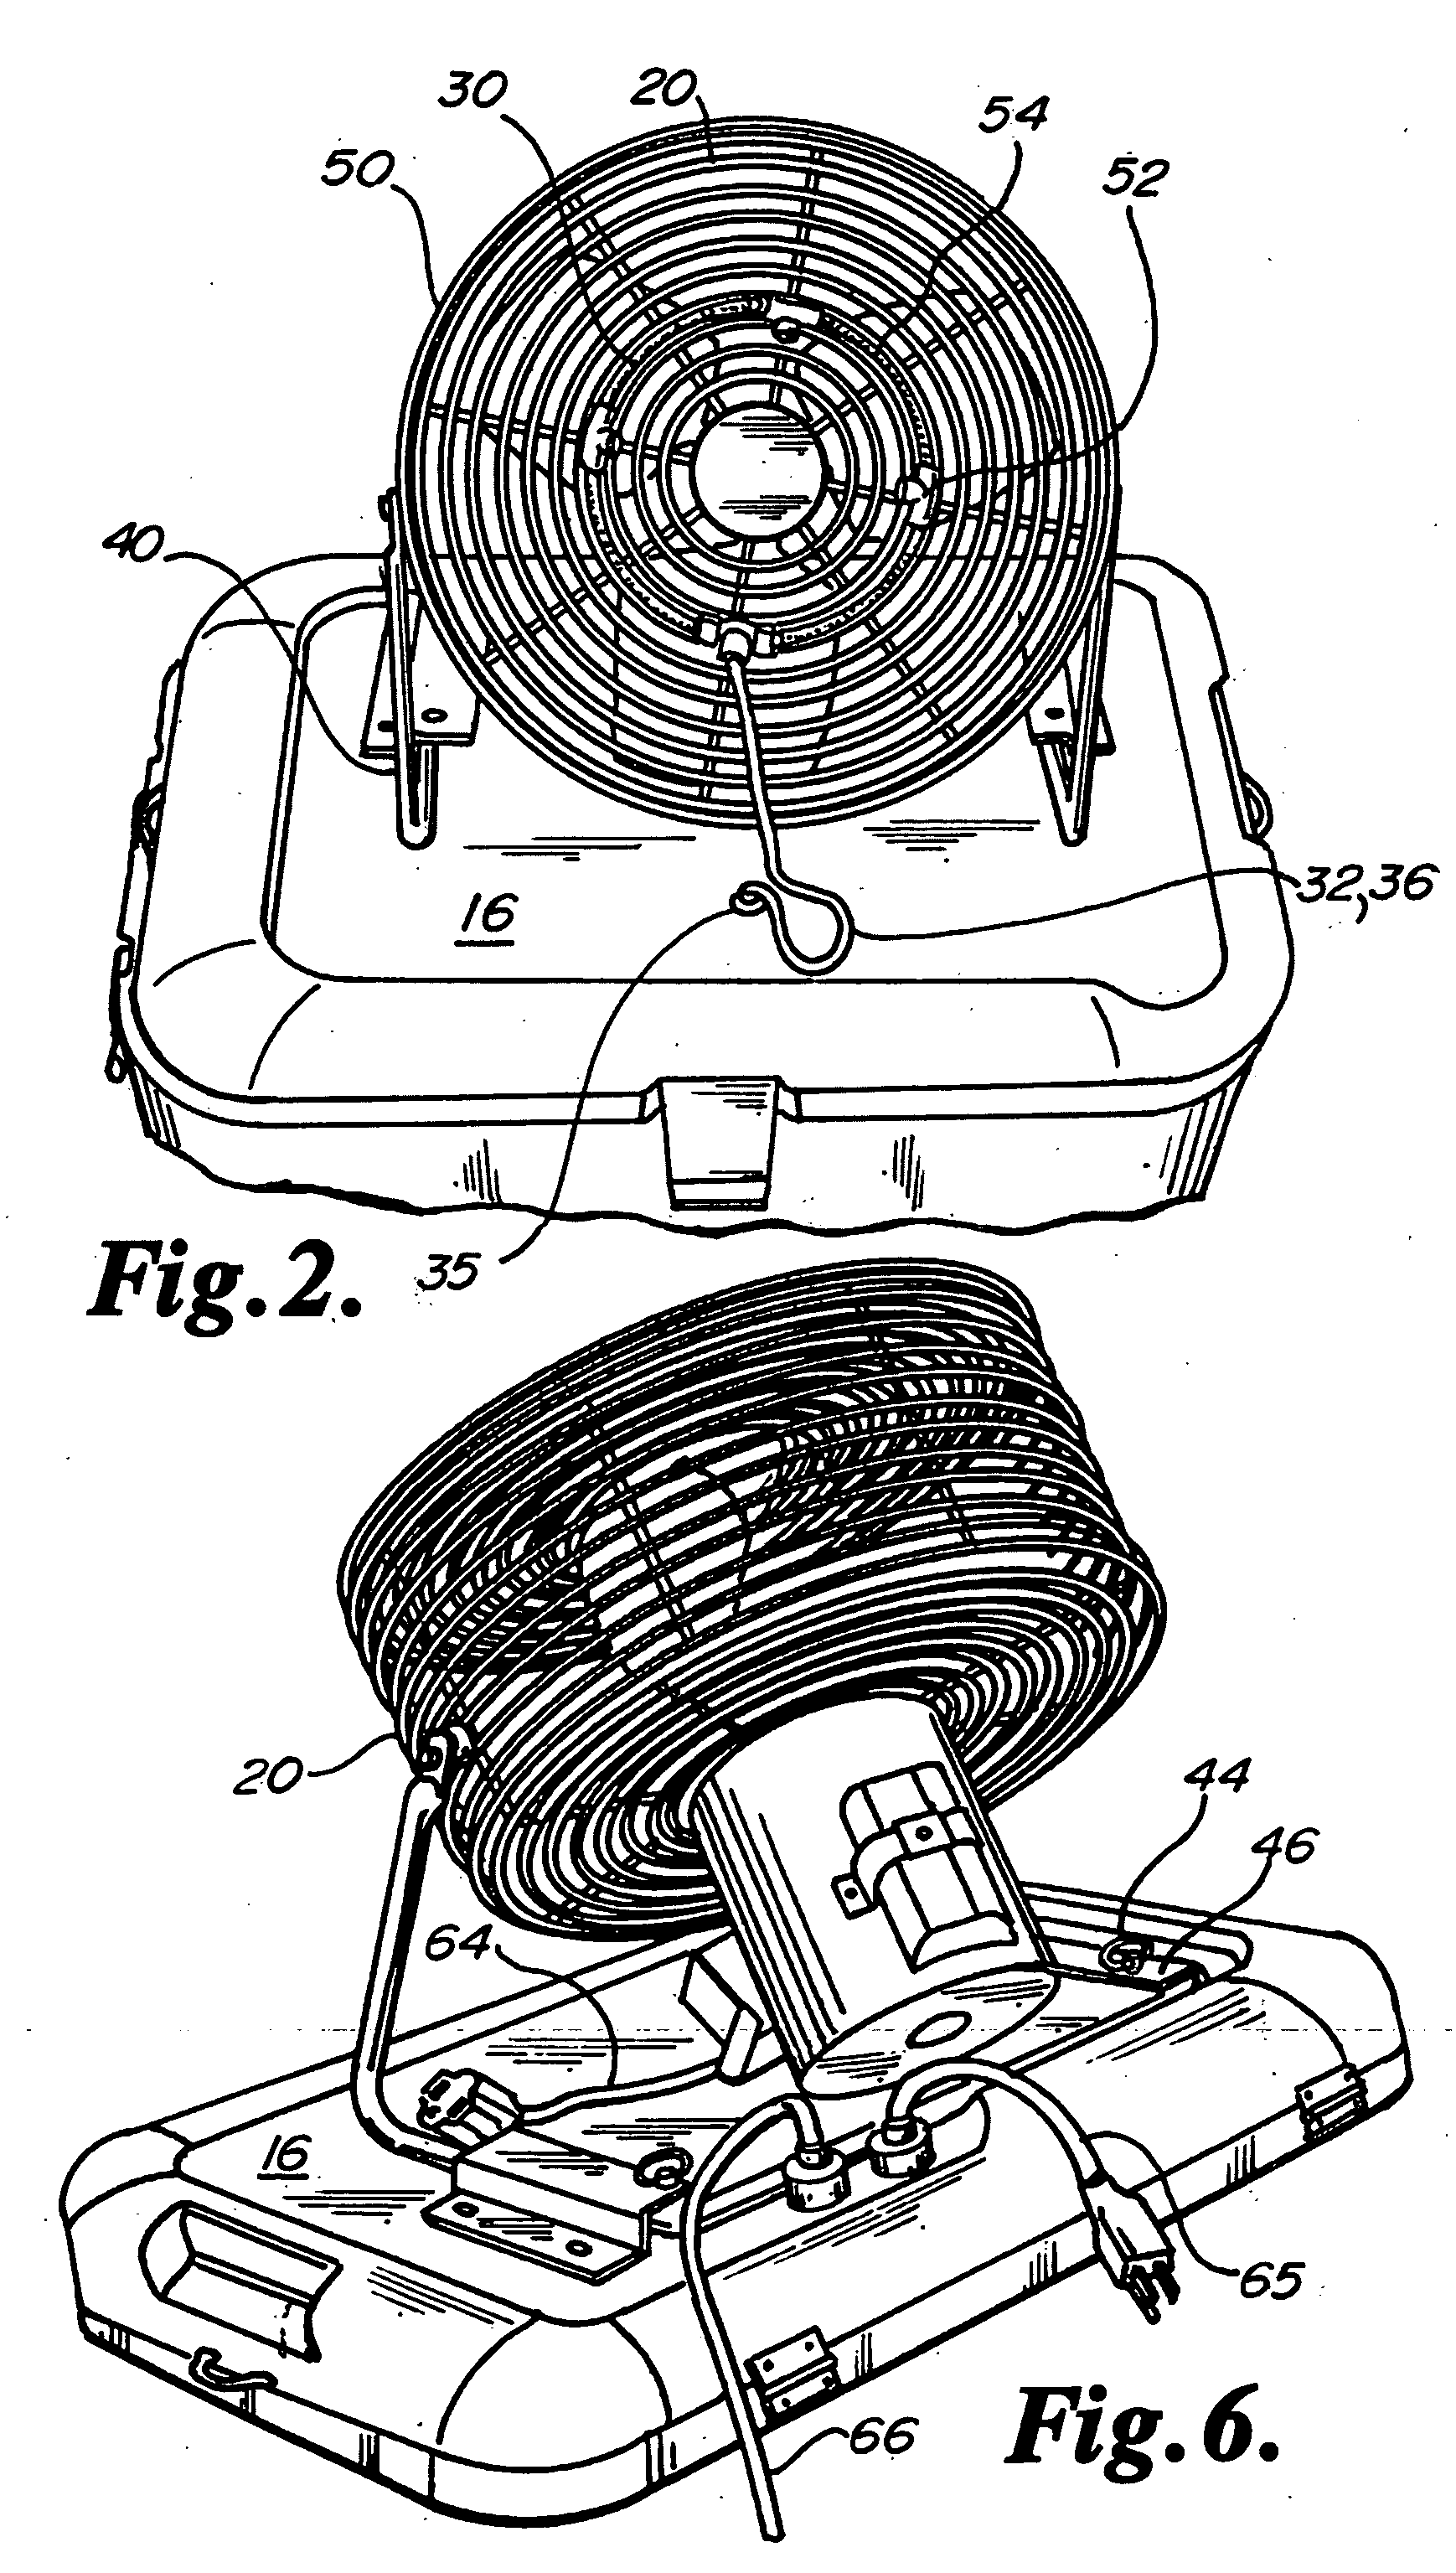 Collapsible misting fan apparatus